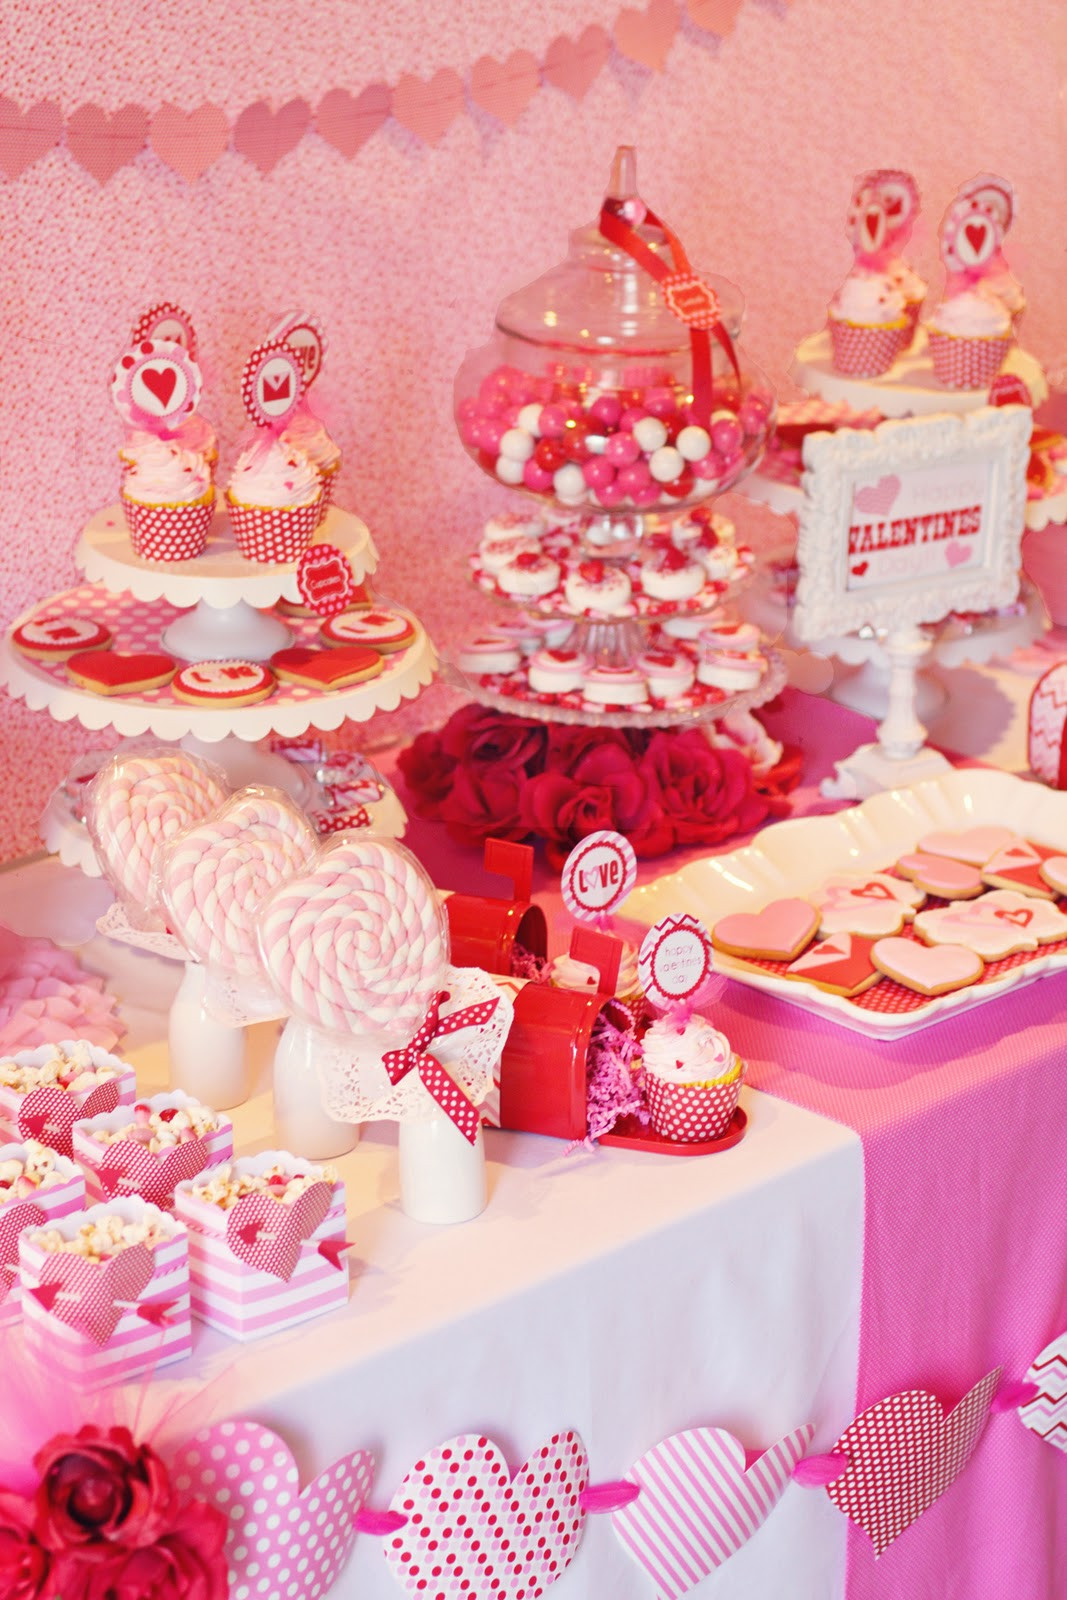 Valentines Day Party Idea
 Amanda s Parties To Go Valentines Party Table Ideas